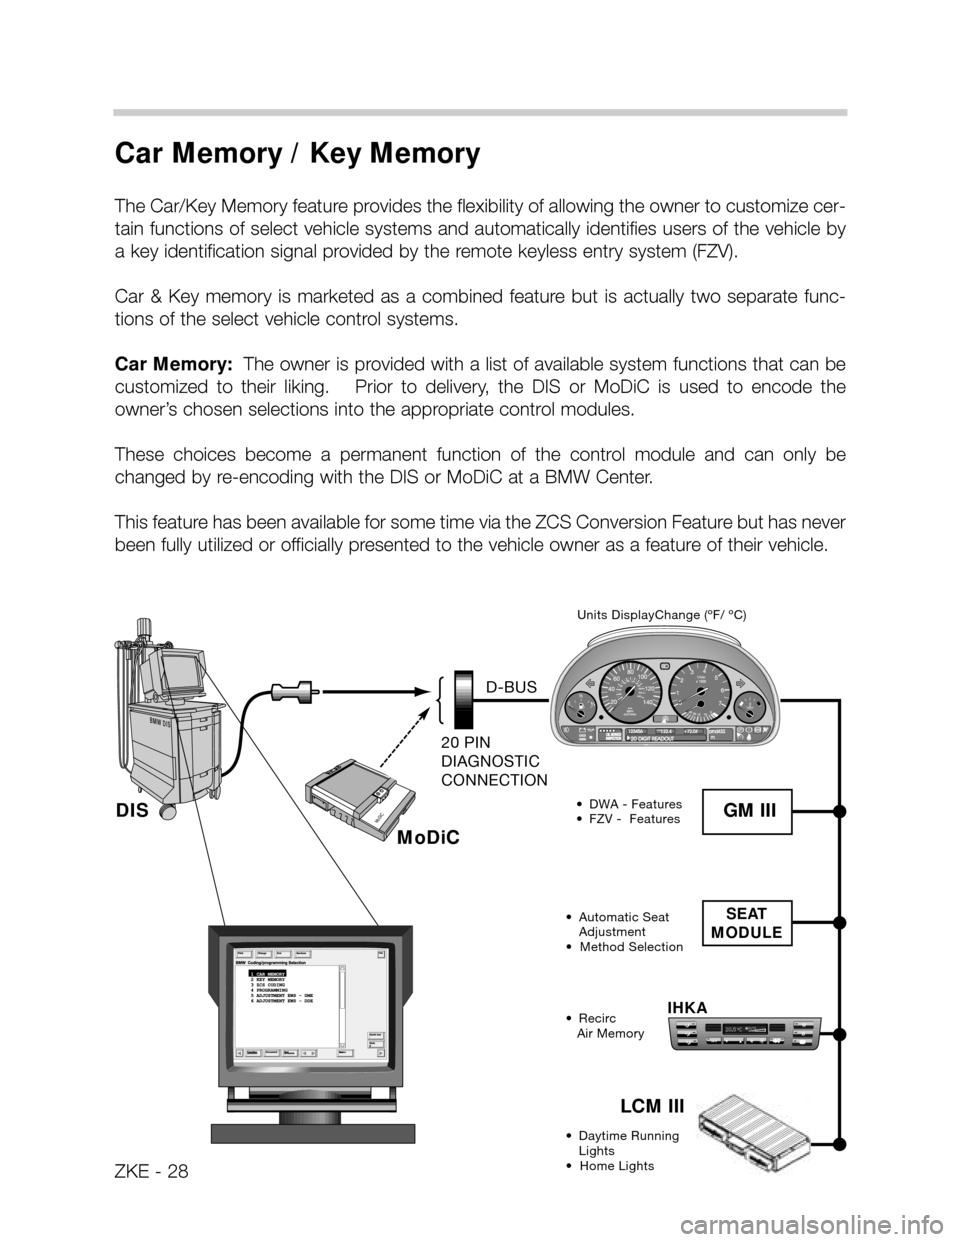 BMW X5 2003 E53 Central Body Electronics Workshop Manual Car Memory / Key Memory 
The Car/Key Memory feature provides the flexibility of allowing the owner to customize cer-
tain functions of select vehicle systems and automatically identifies users of the 